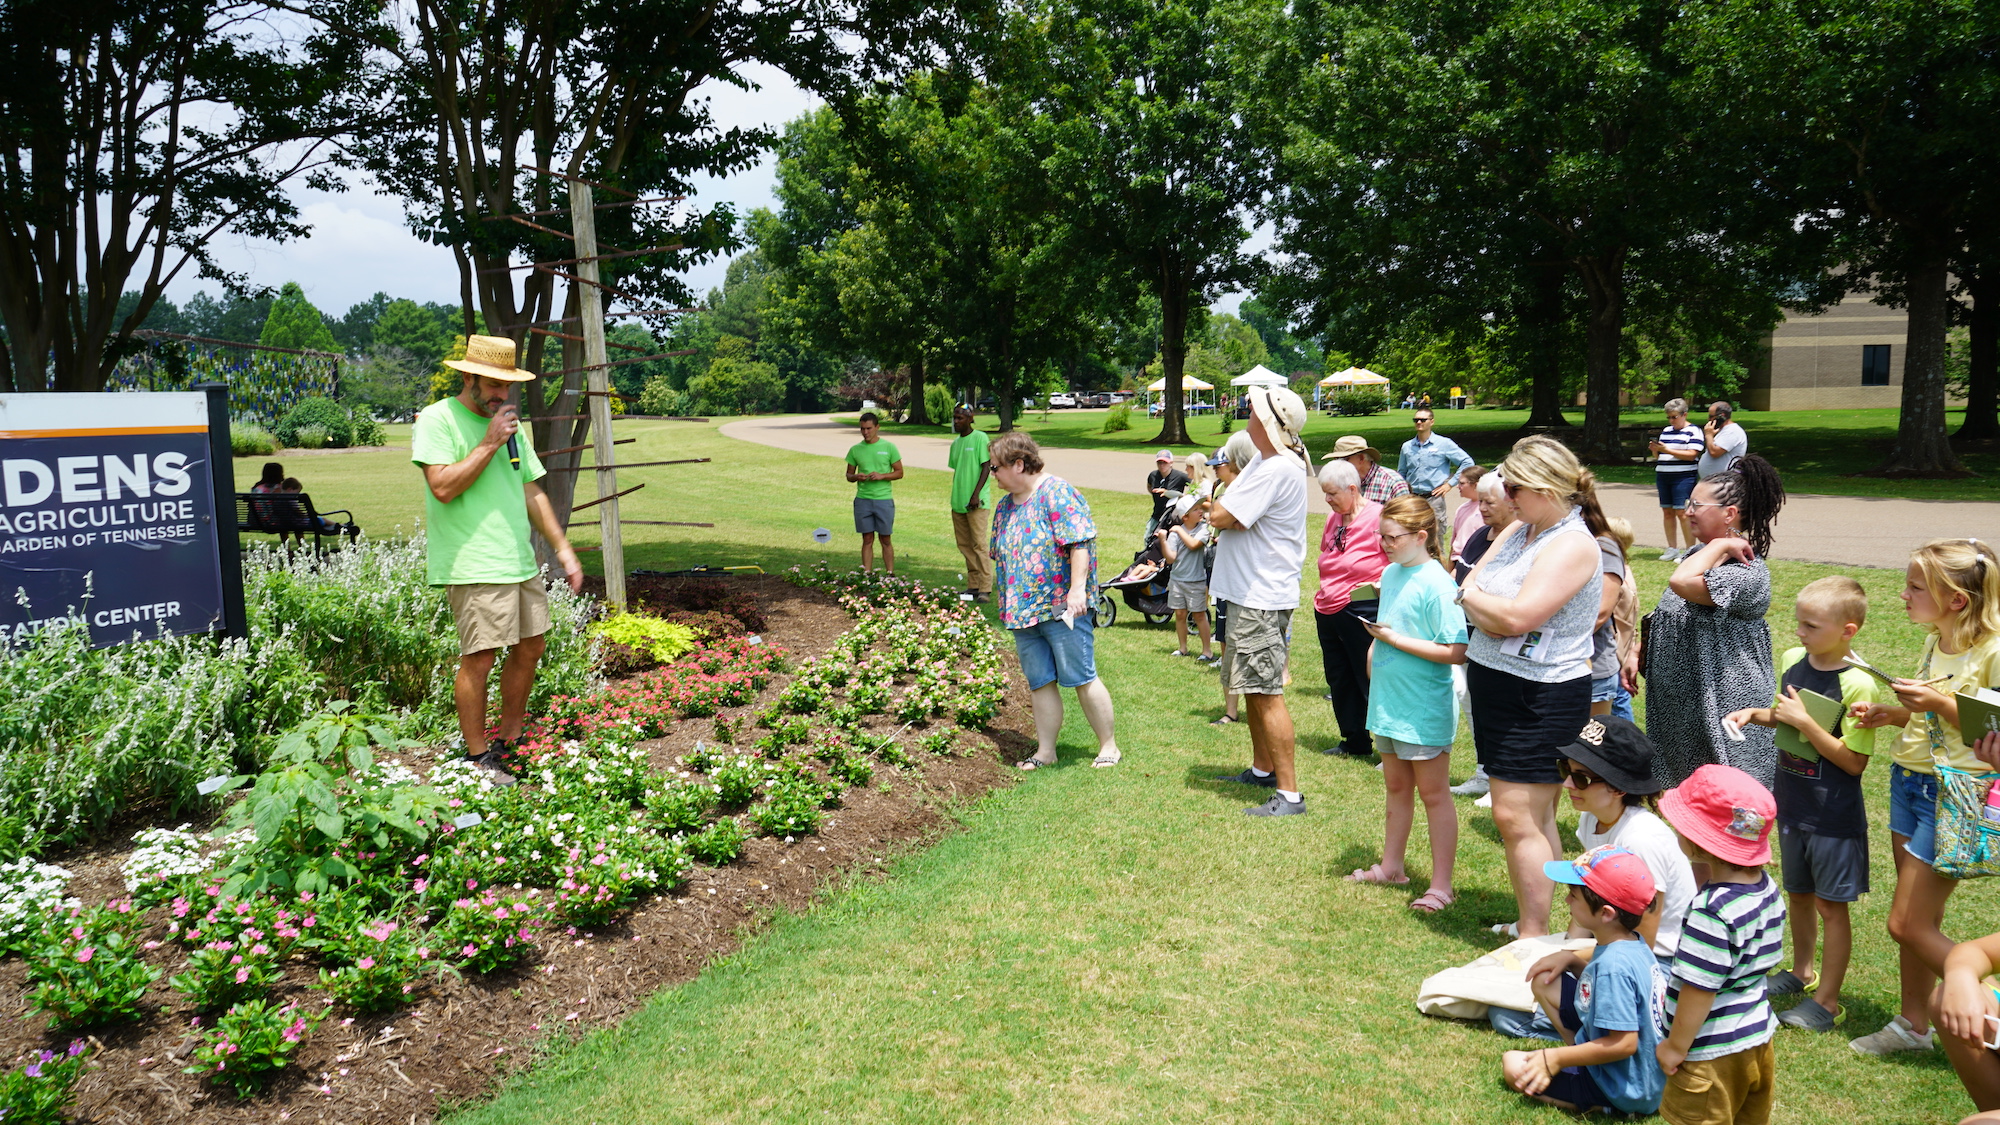 A small crowd stands in front of a flower bed during a guided tour of UT Gardens, Jackson, as a horticulturist speaks into a microphone